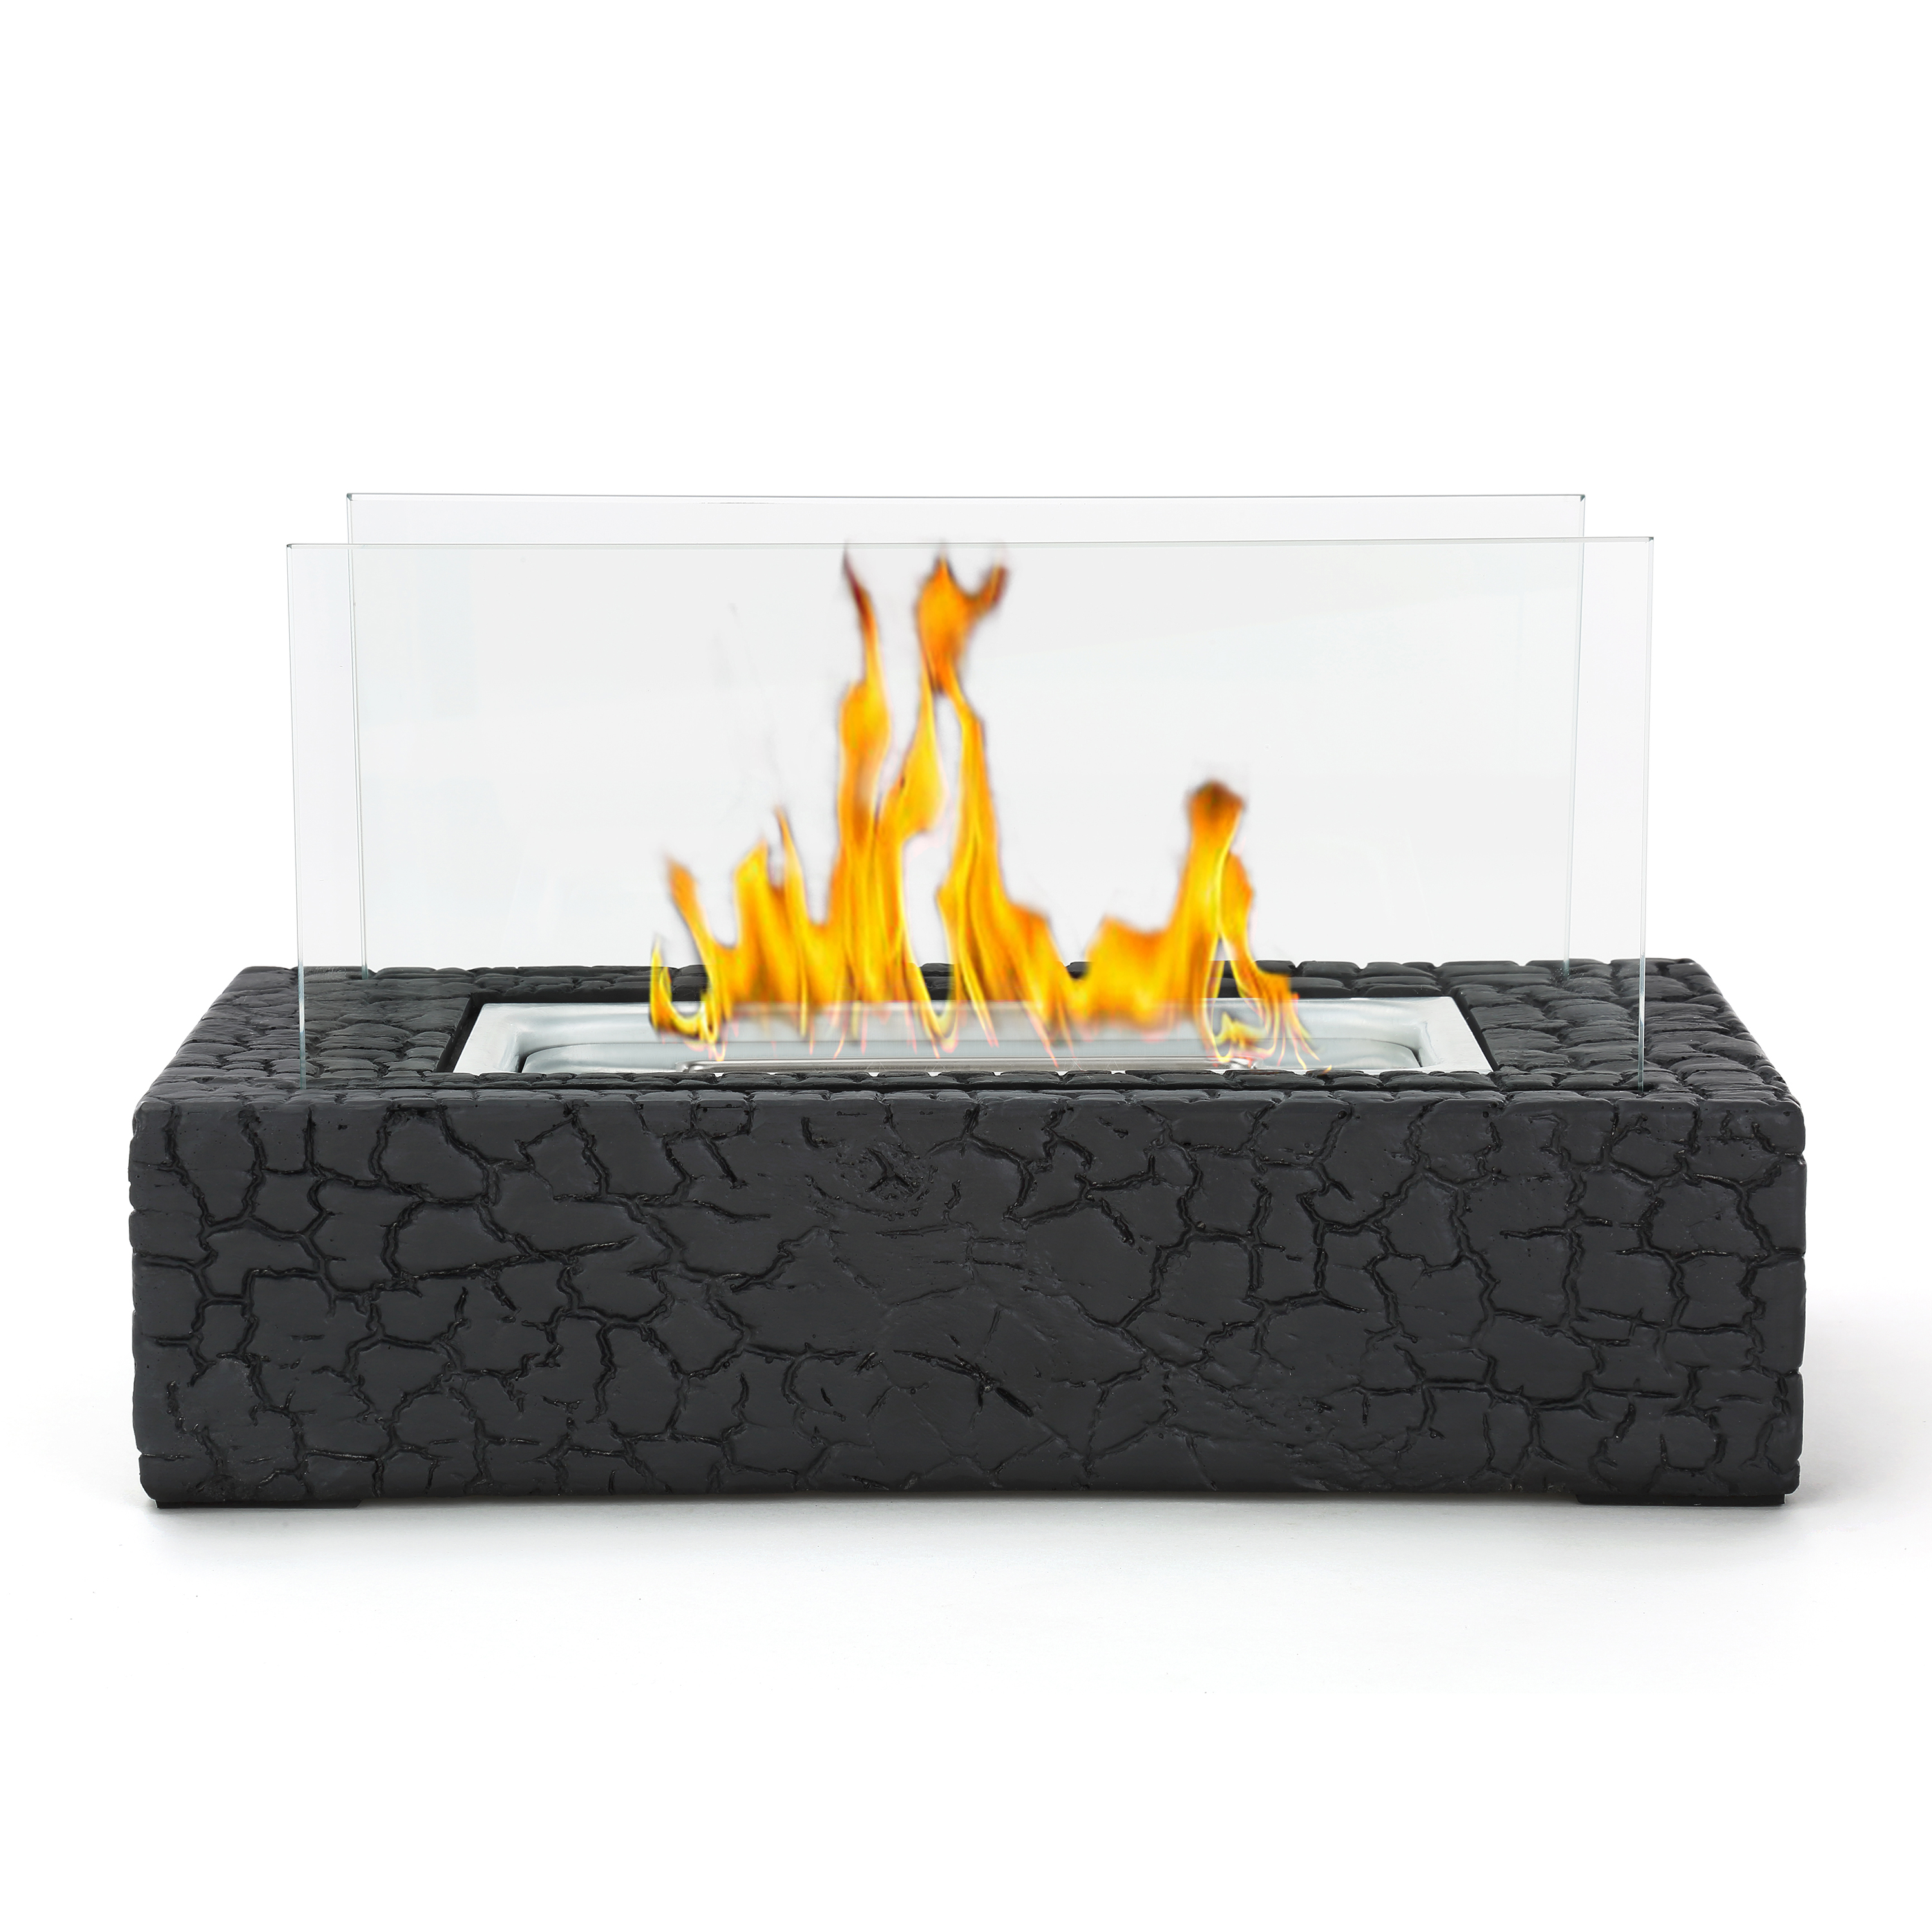 LIMOR Indoor Tabletop Fire Pit - Mini Table Top Firepit with Extinguishing  Cover is Bio Ethanol Fireplace Home Decor and Outdoor Portable Table Top